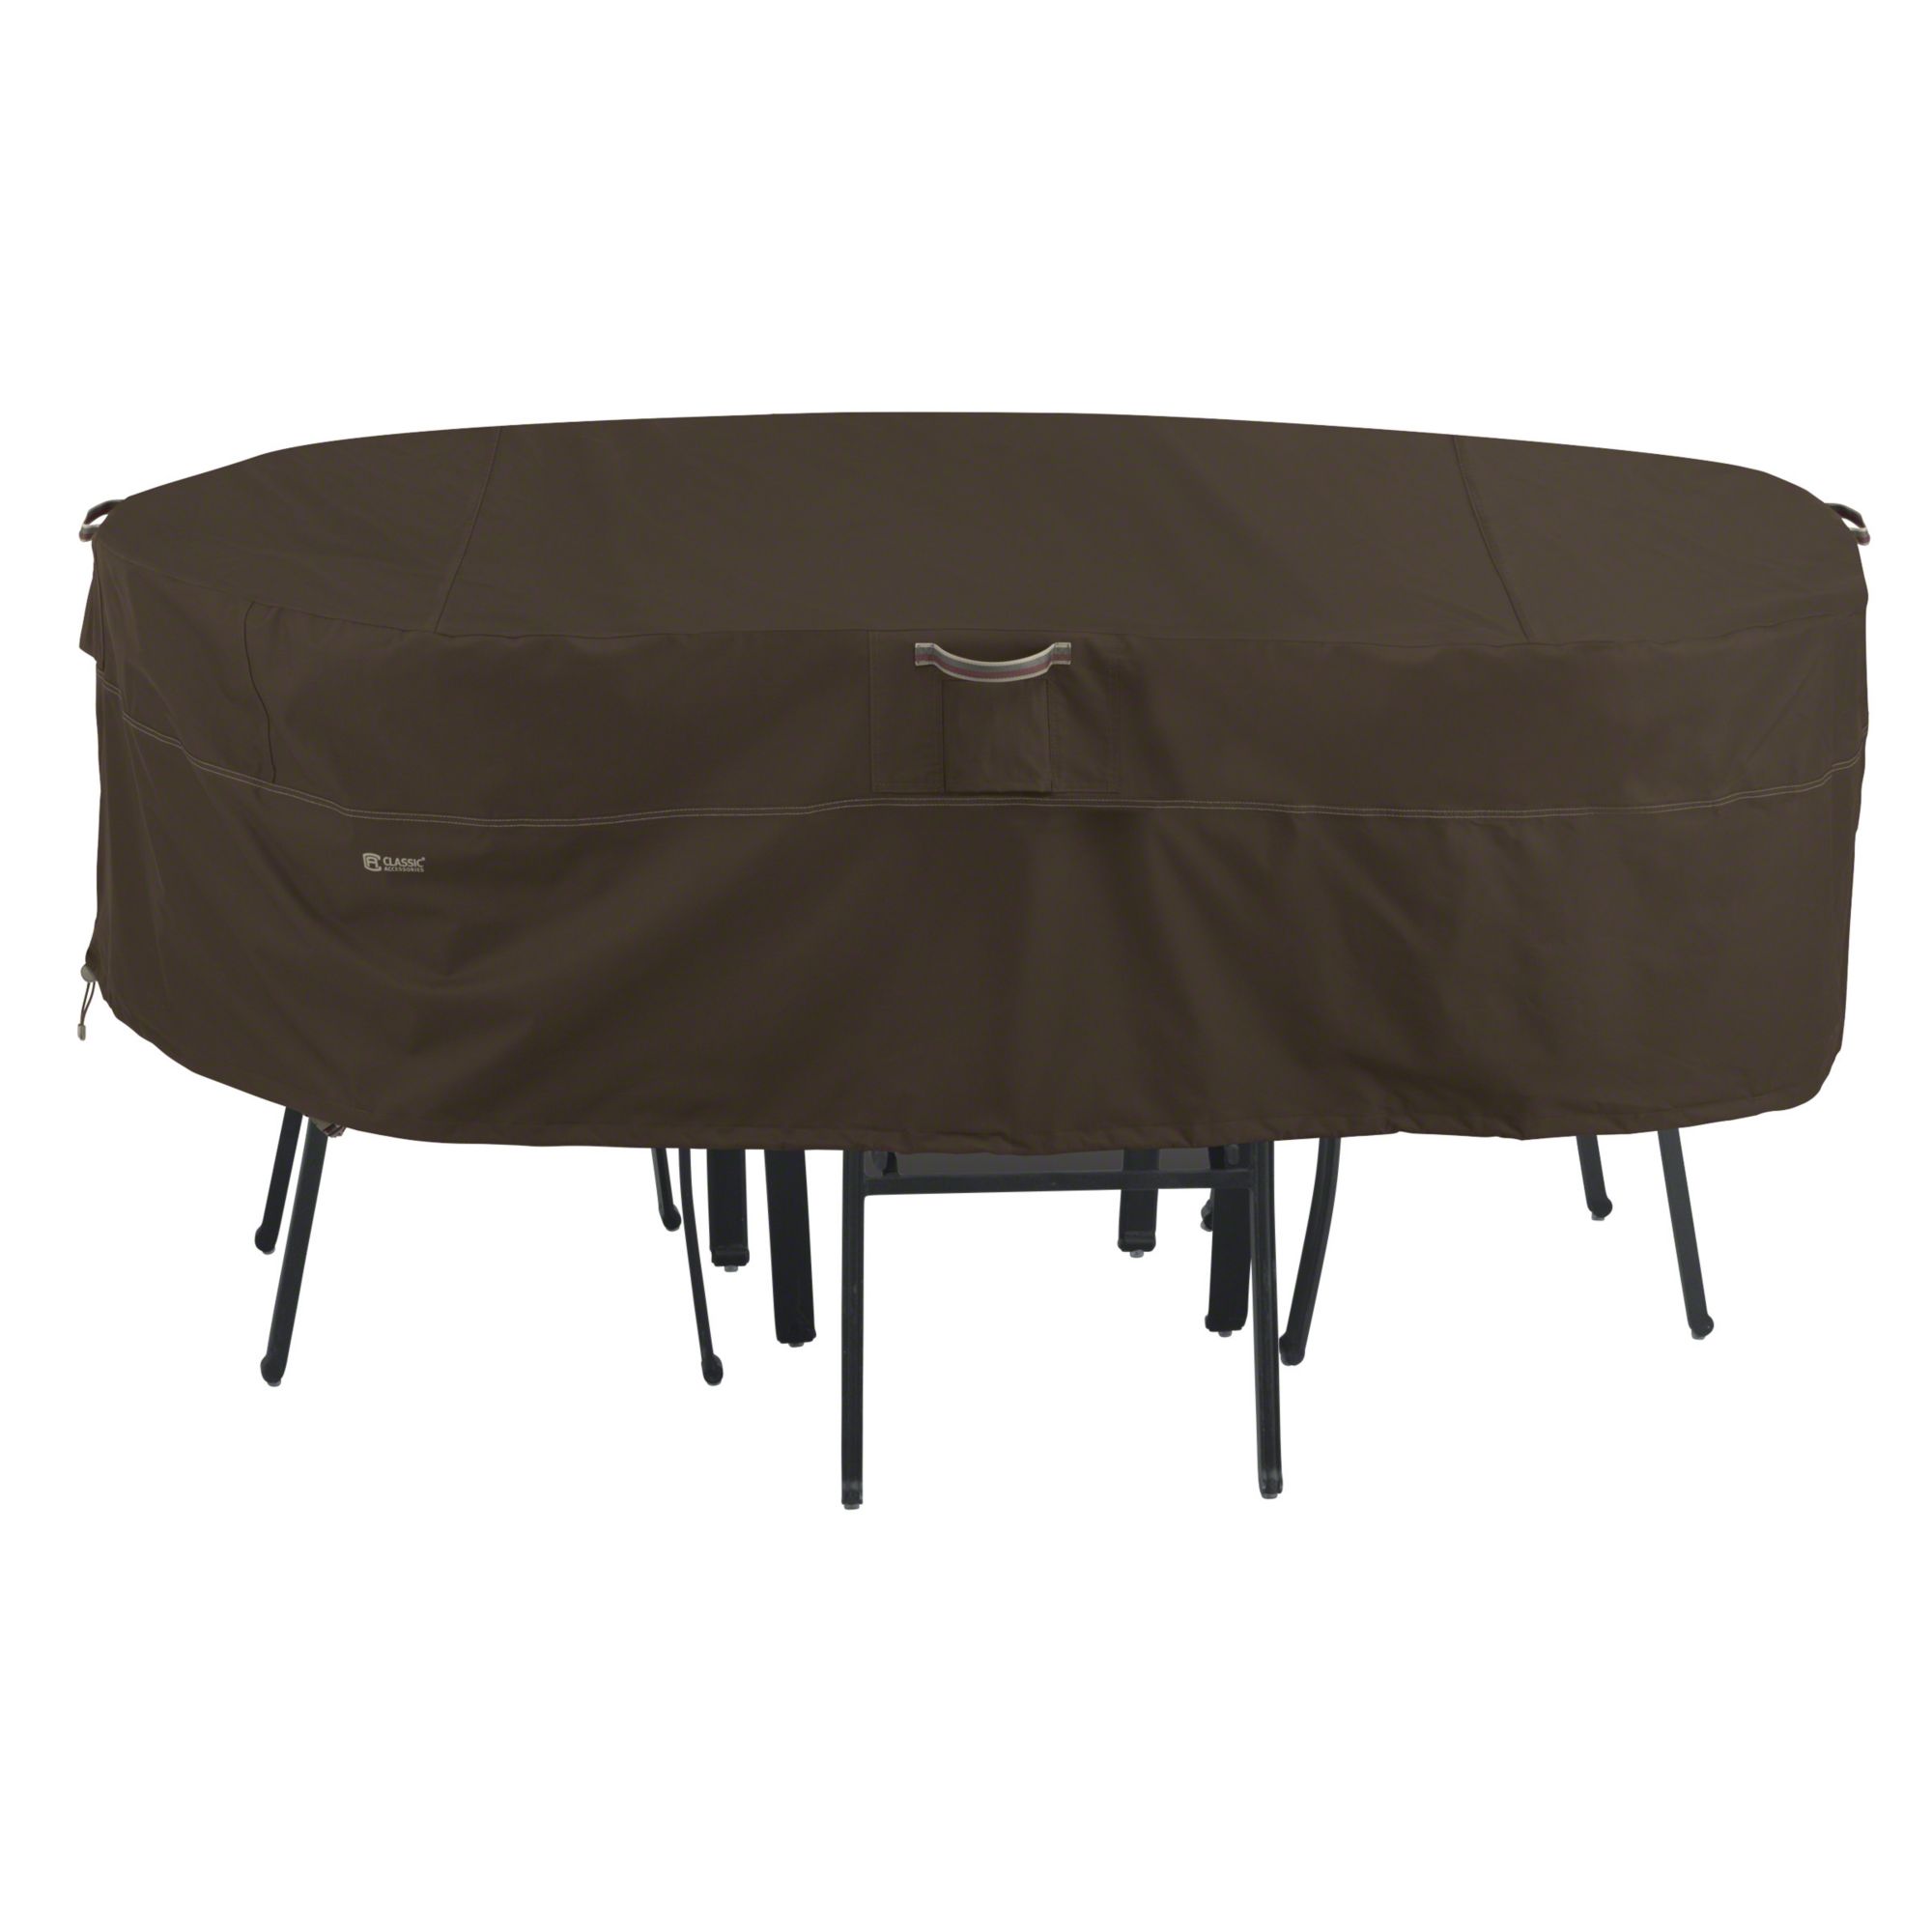 Classic Accessories Madrona Extra-Large Rectangular/Oval Patio Set Cover